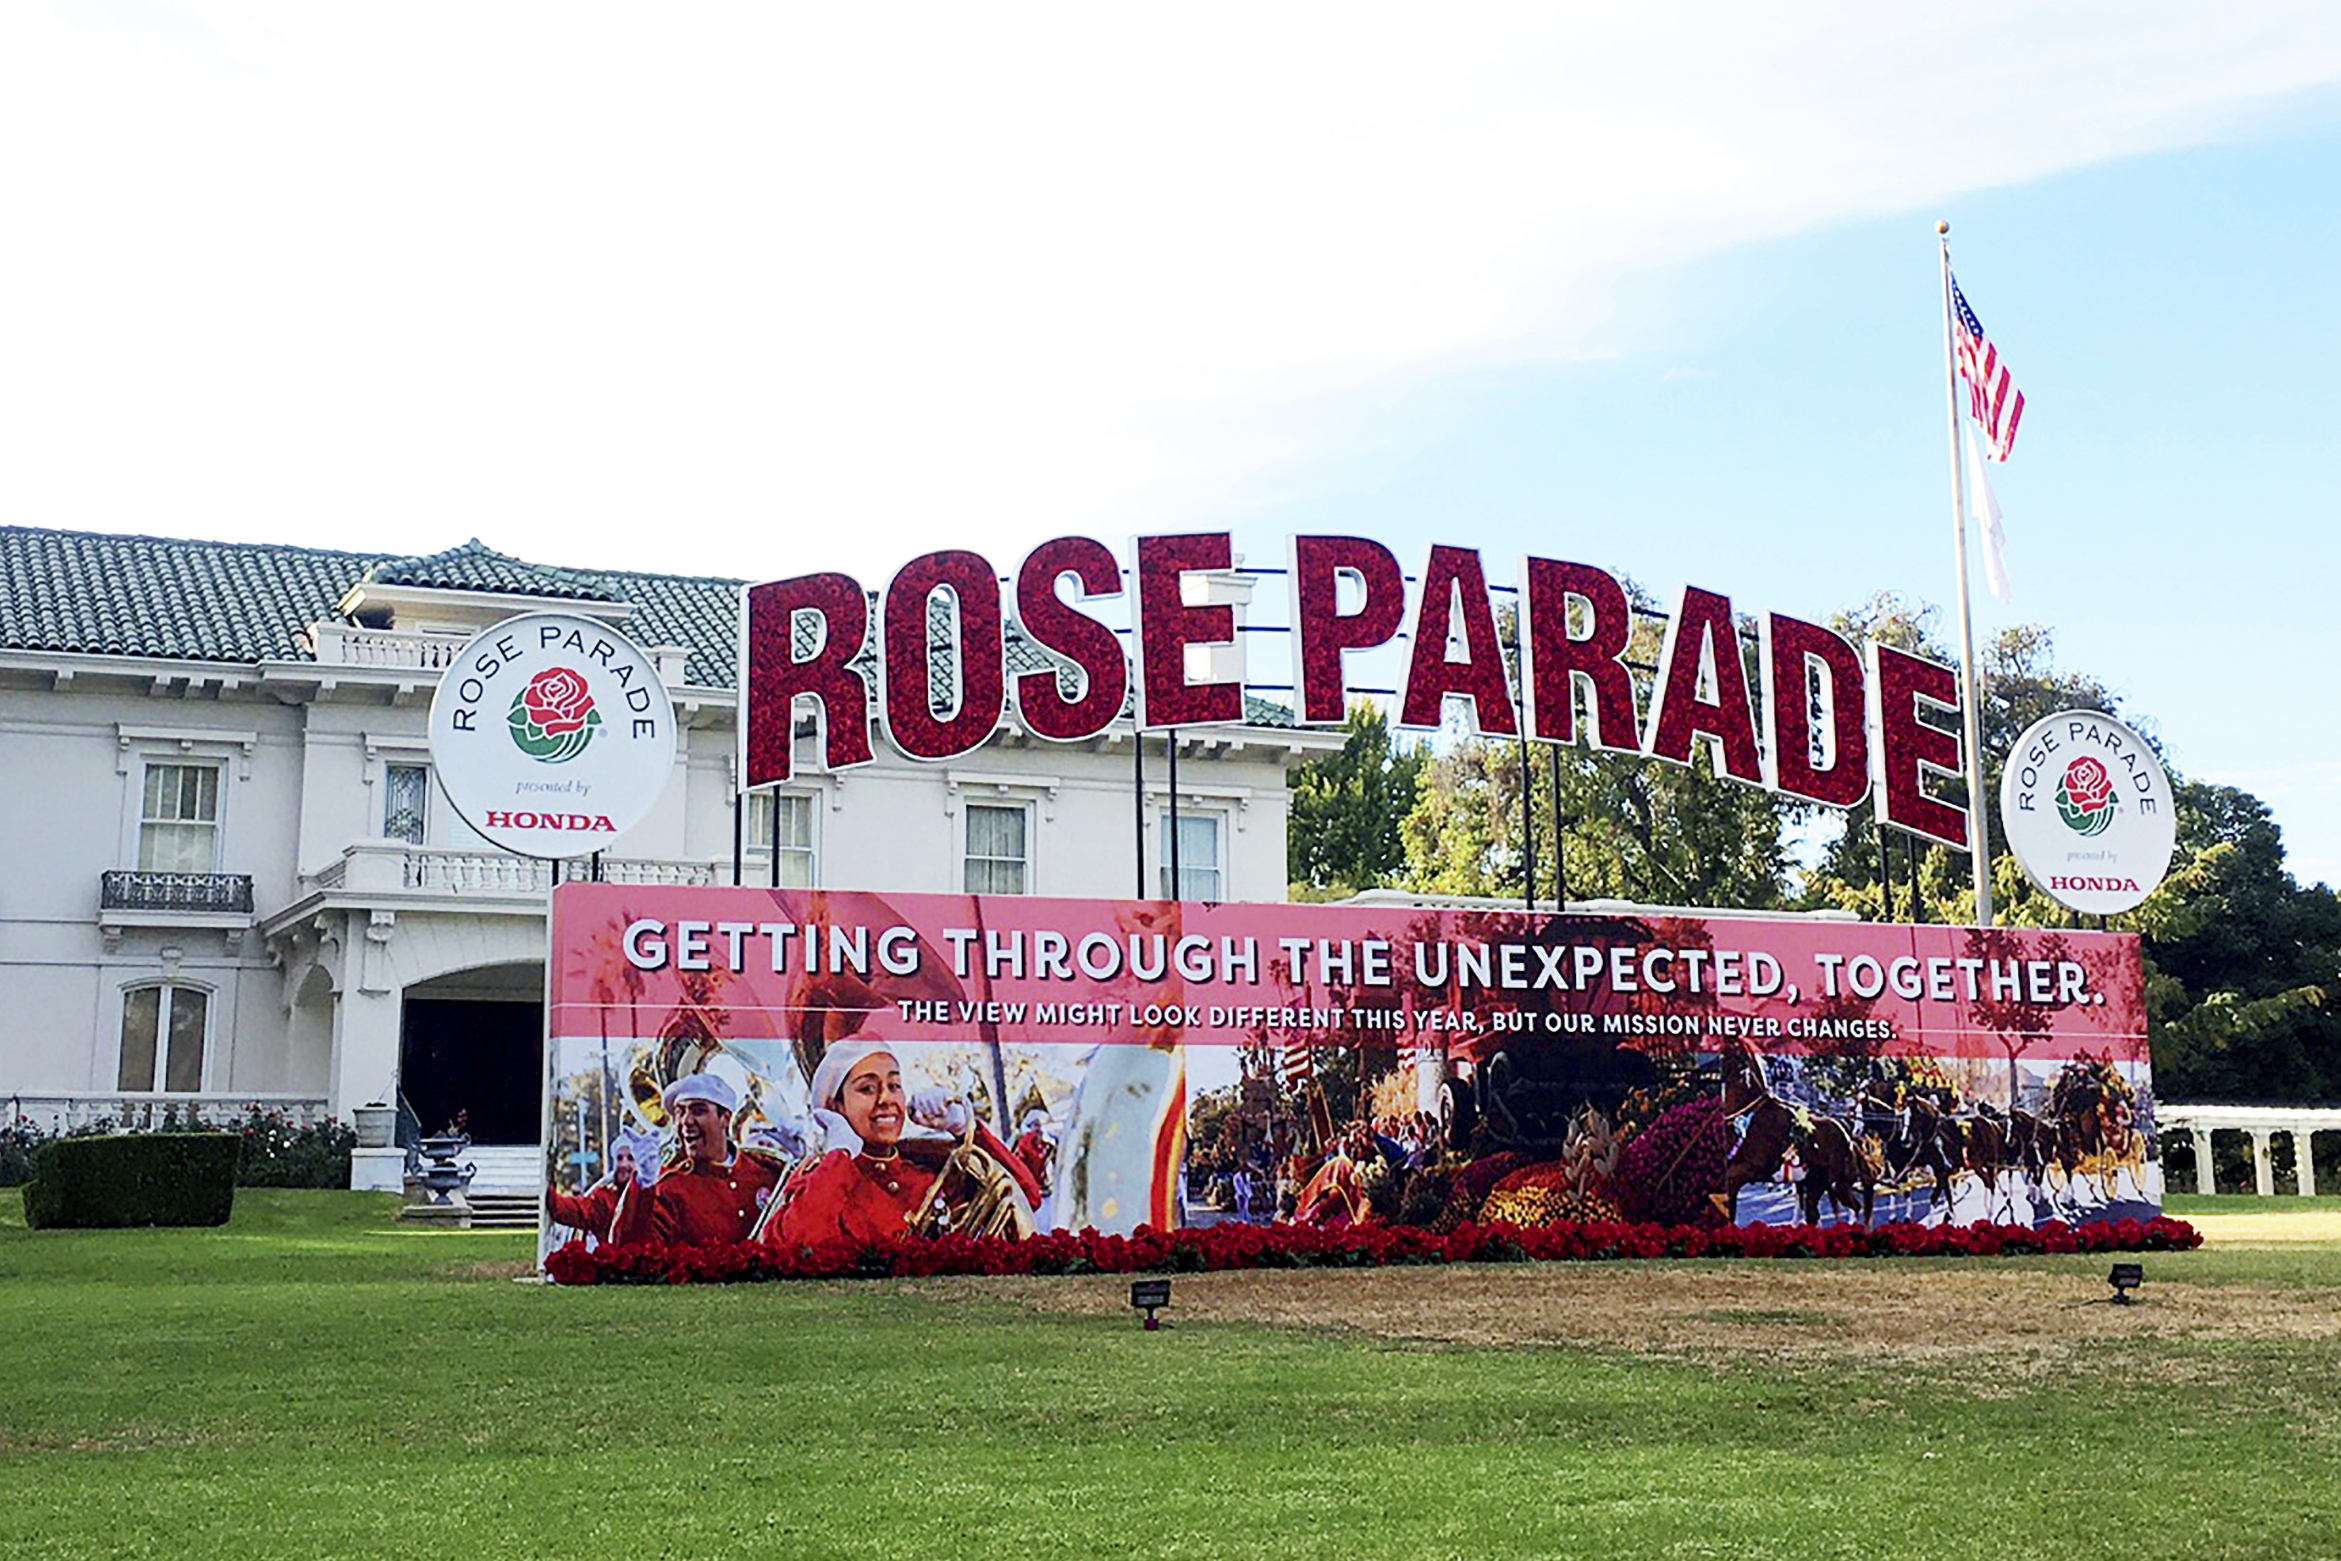 Tournament House, the headquarters of the Tournament of Roses, sponsor of the Rose Parade, is shown Wednesday, Dec. 9, 2020, in Pasadena. (AP Photo/John Antczak)